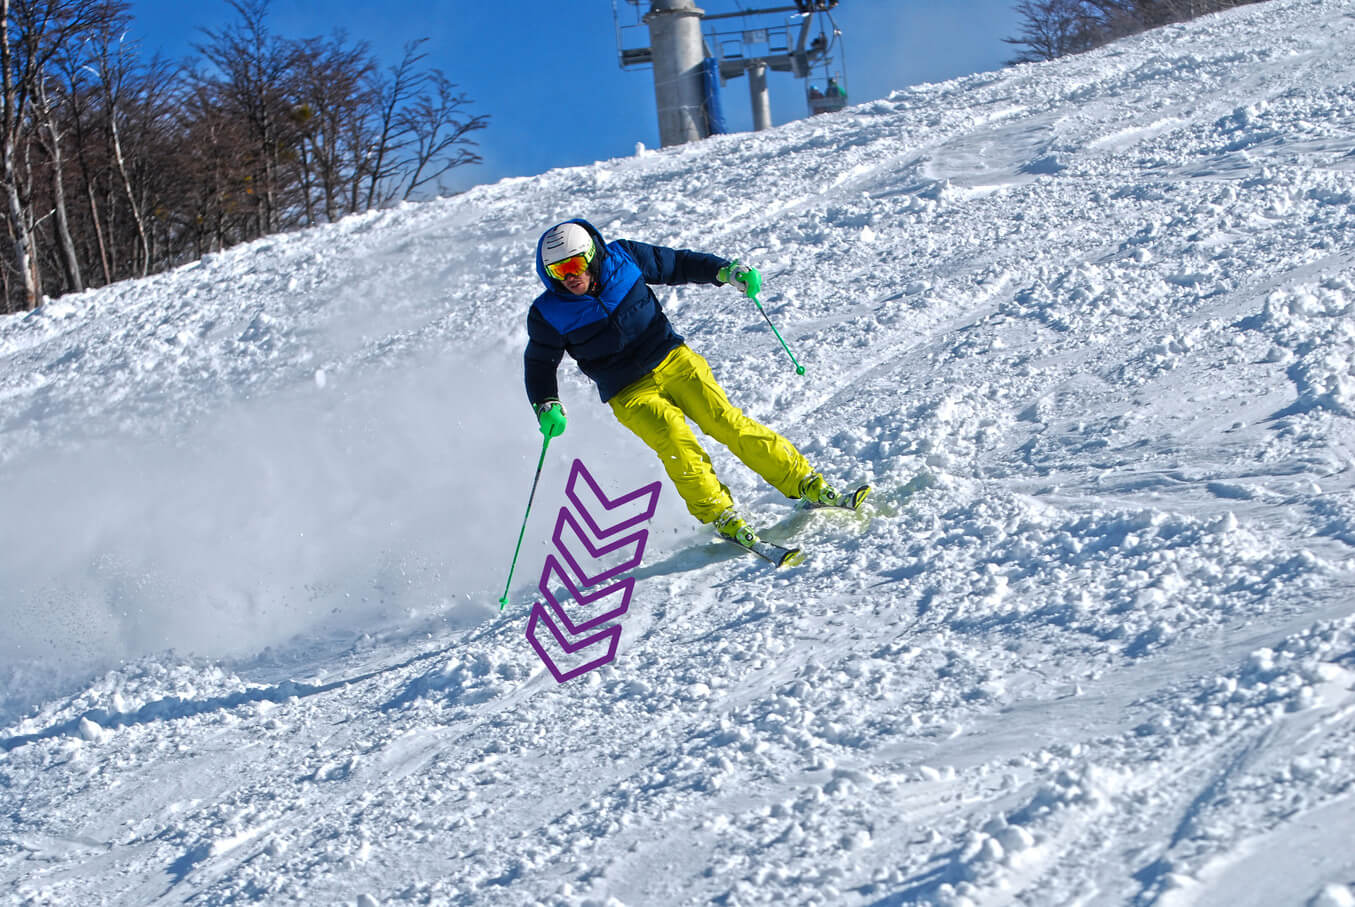 Skier initiating a turn on a steep slope - moving center of mass forward and down the valley